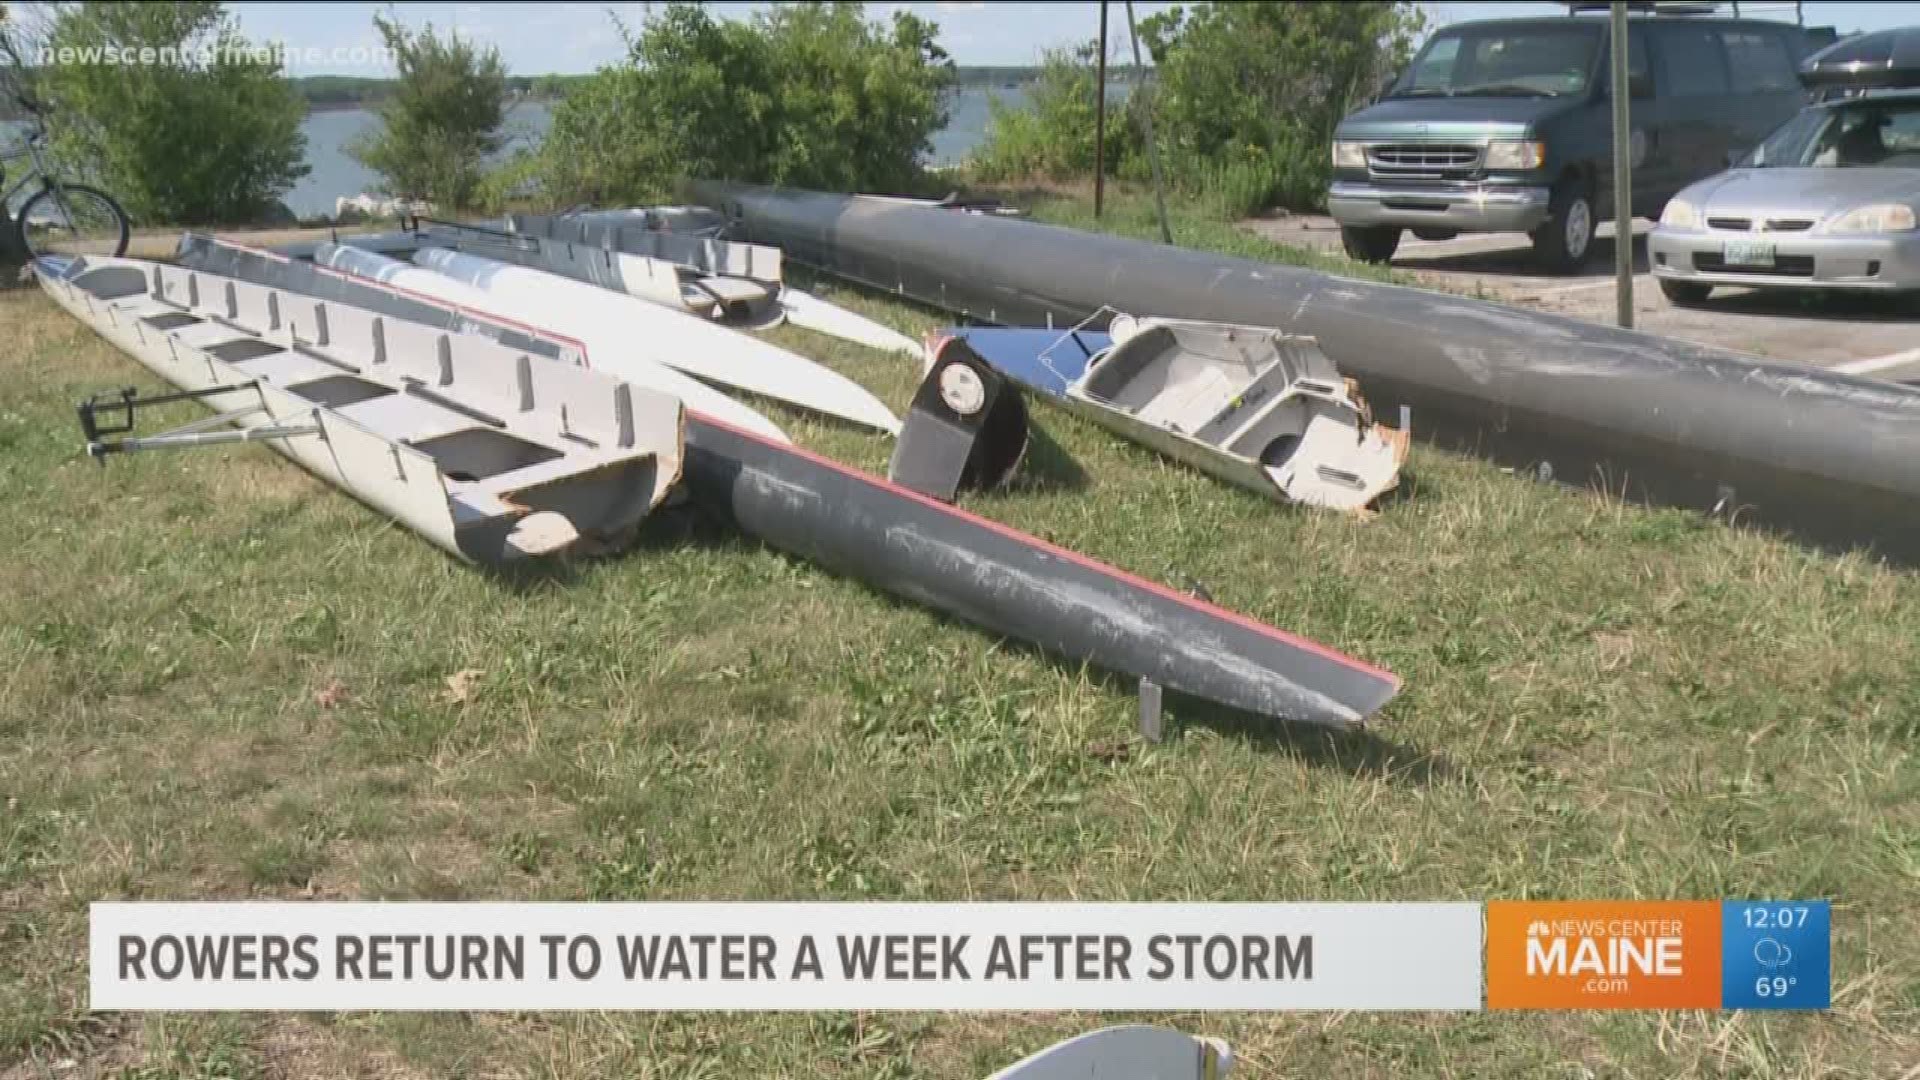 Rowers return to water a week after storm